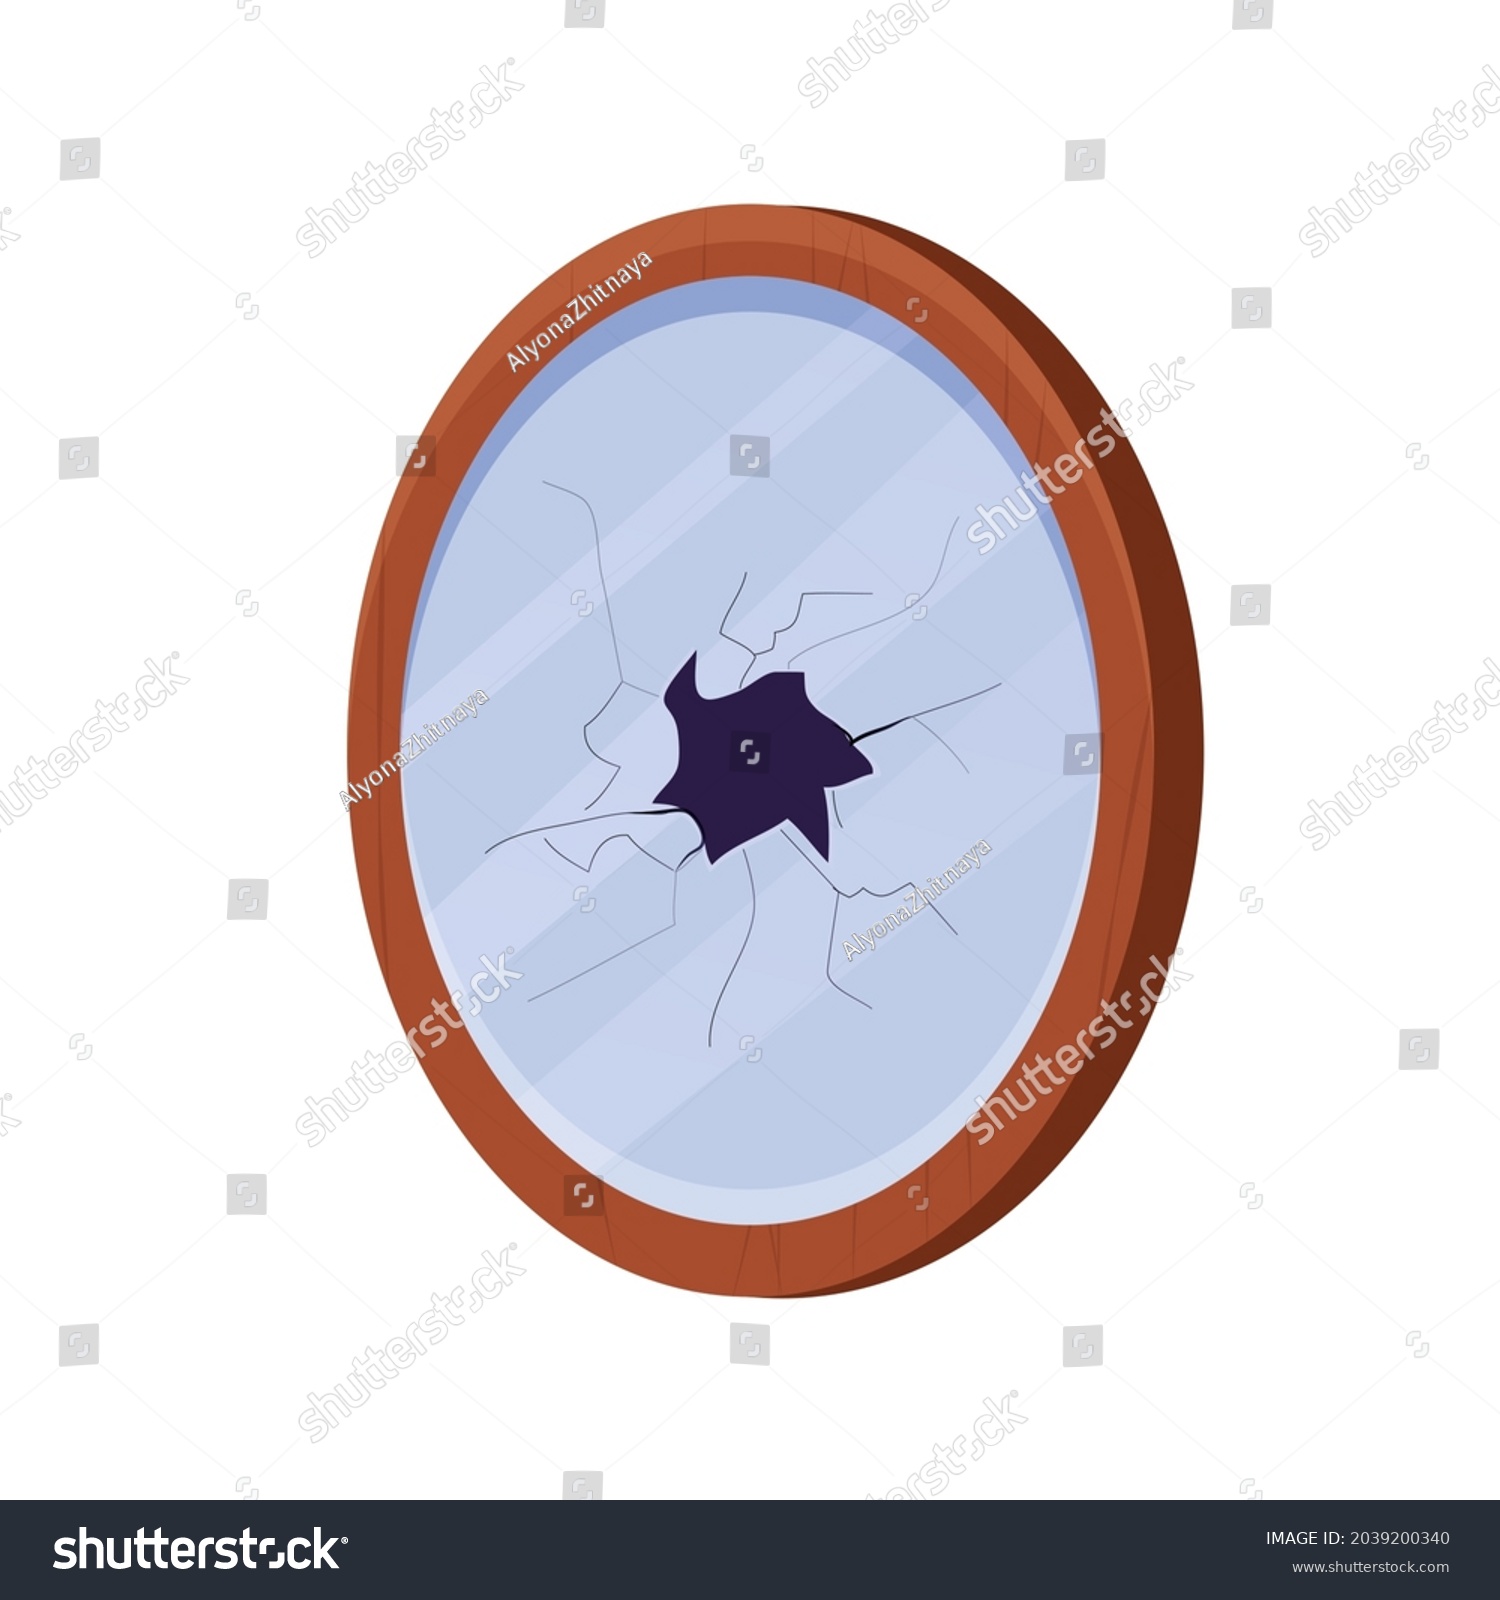 SVG of Wooden frame with broken mirror in cartoon style isolated on white background. Bad luck, accident, cracked looking glass. svg